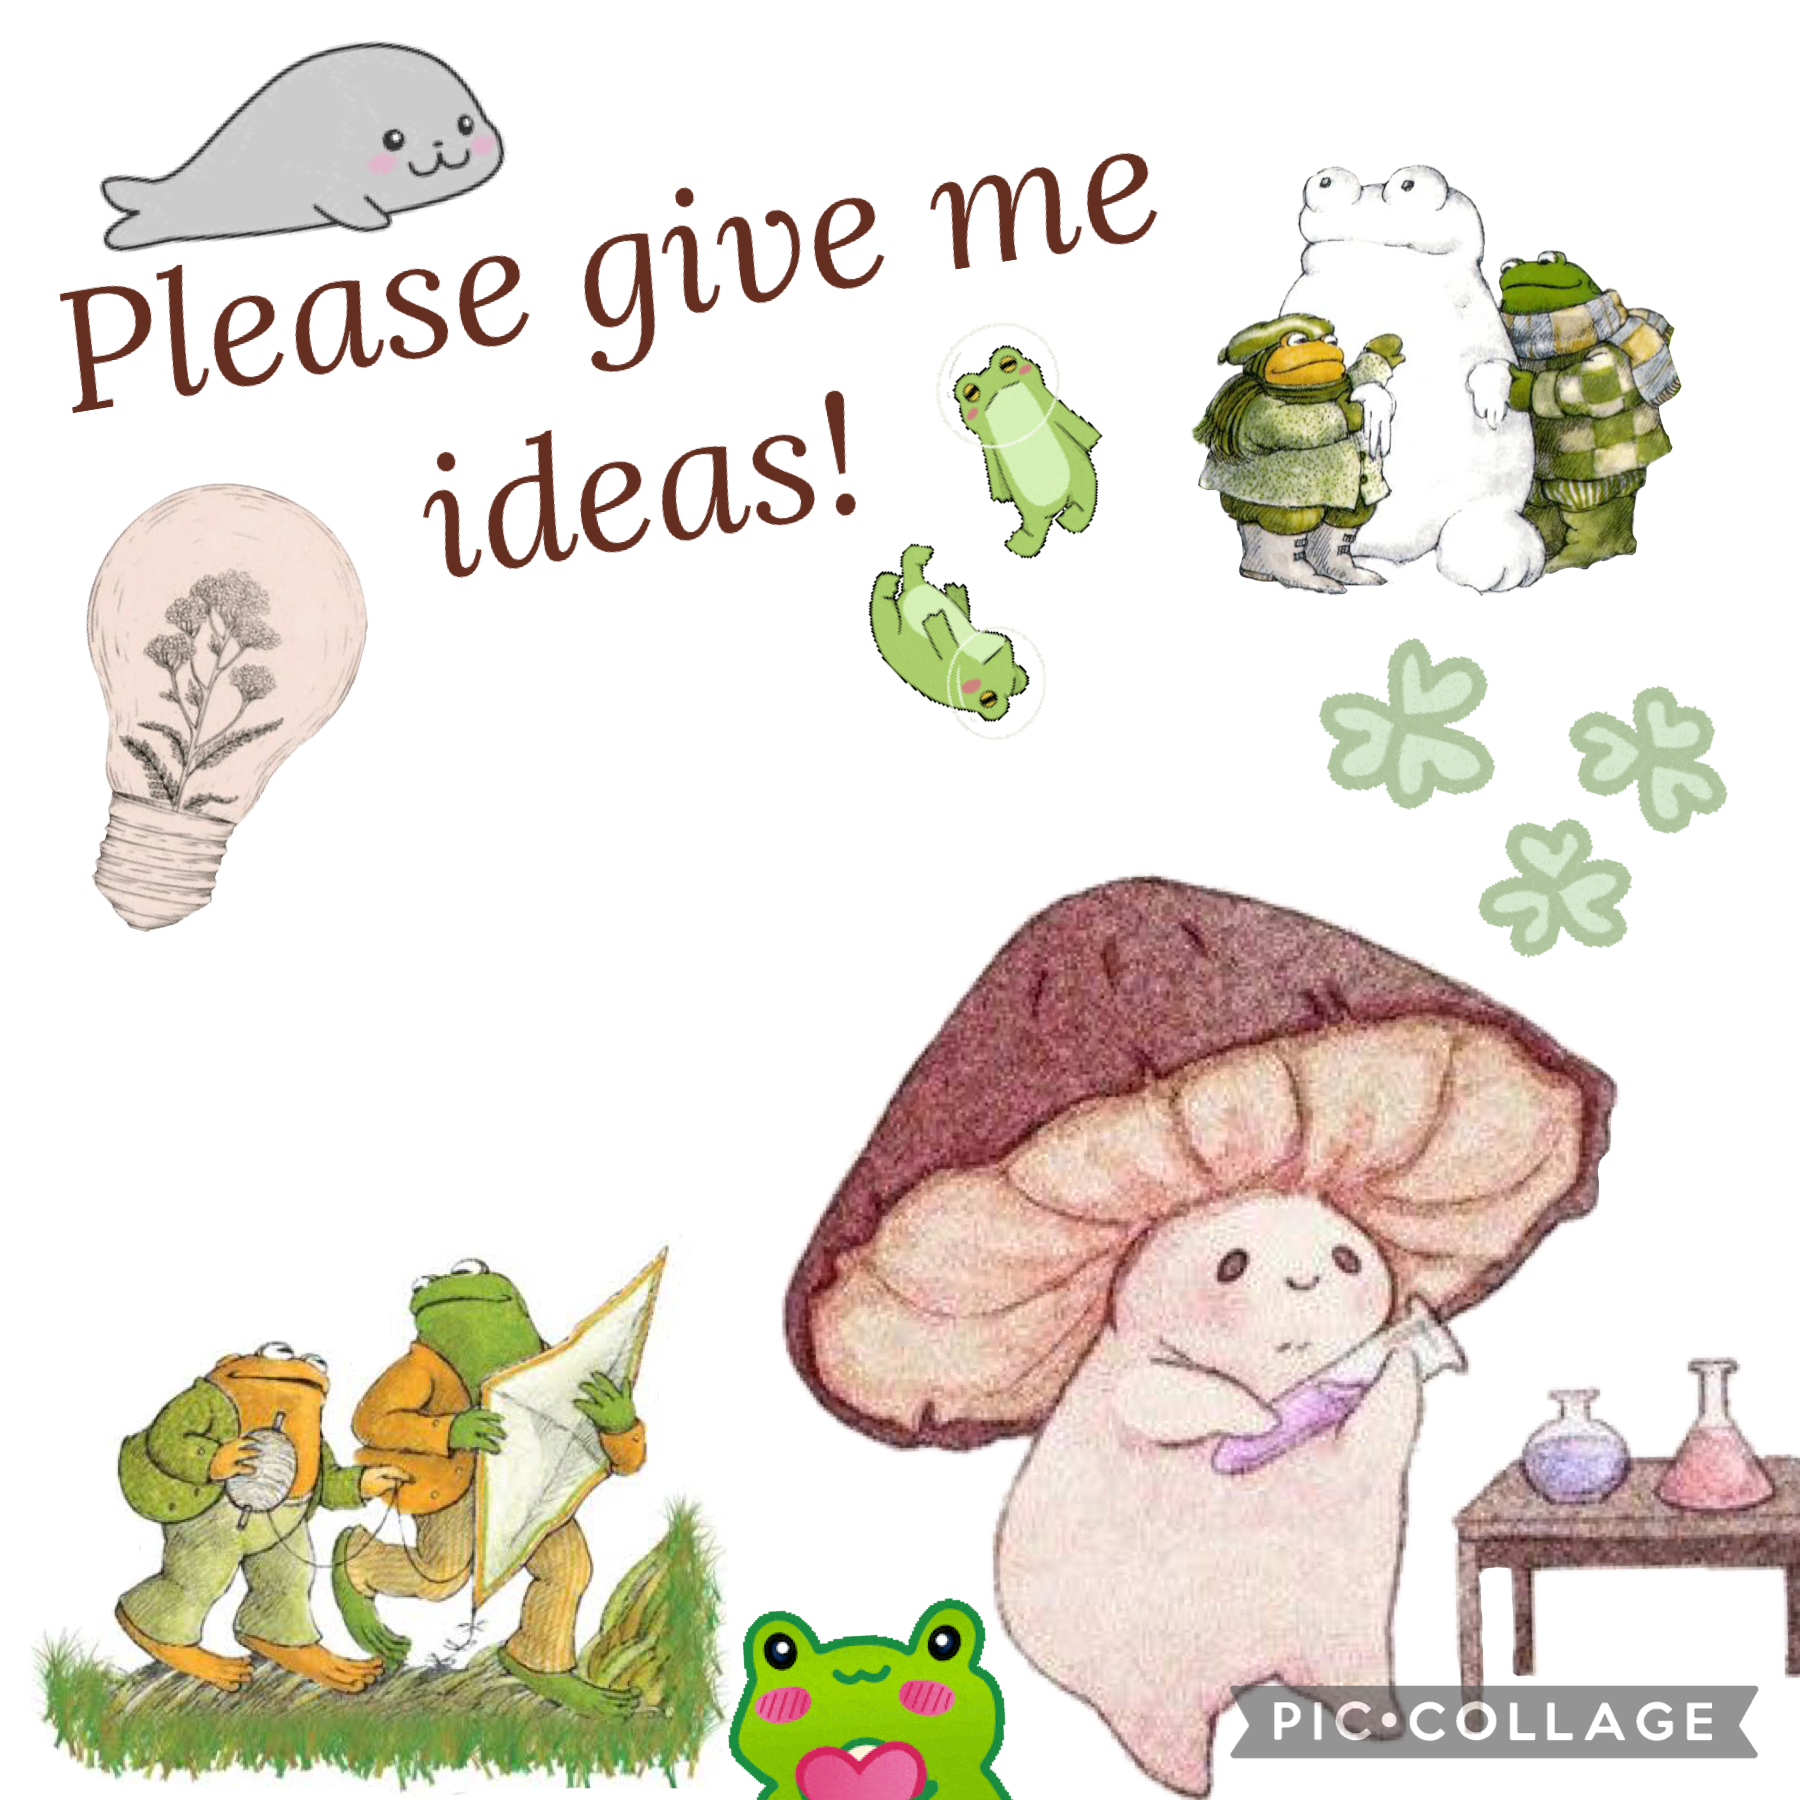 Please give me collage ideas!